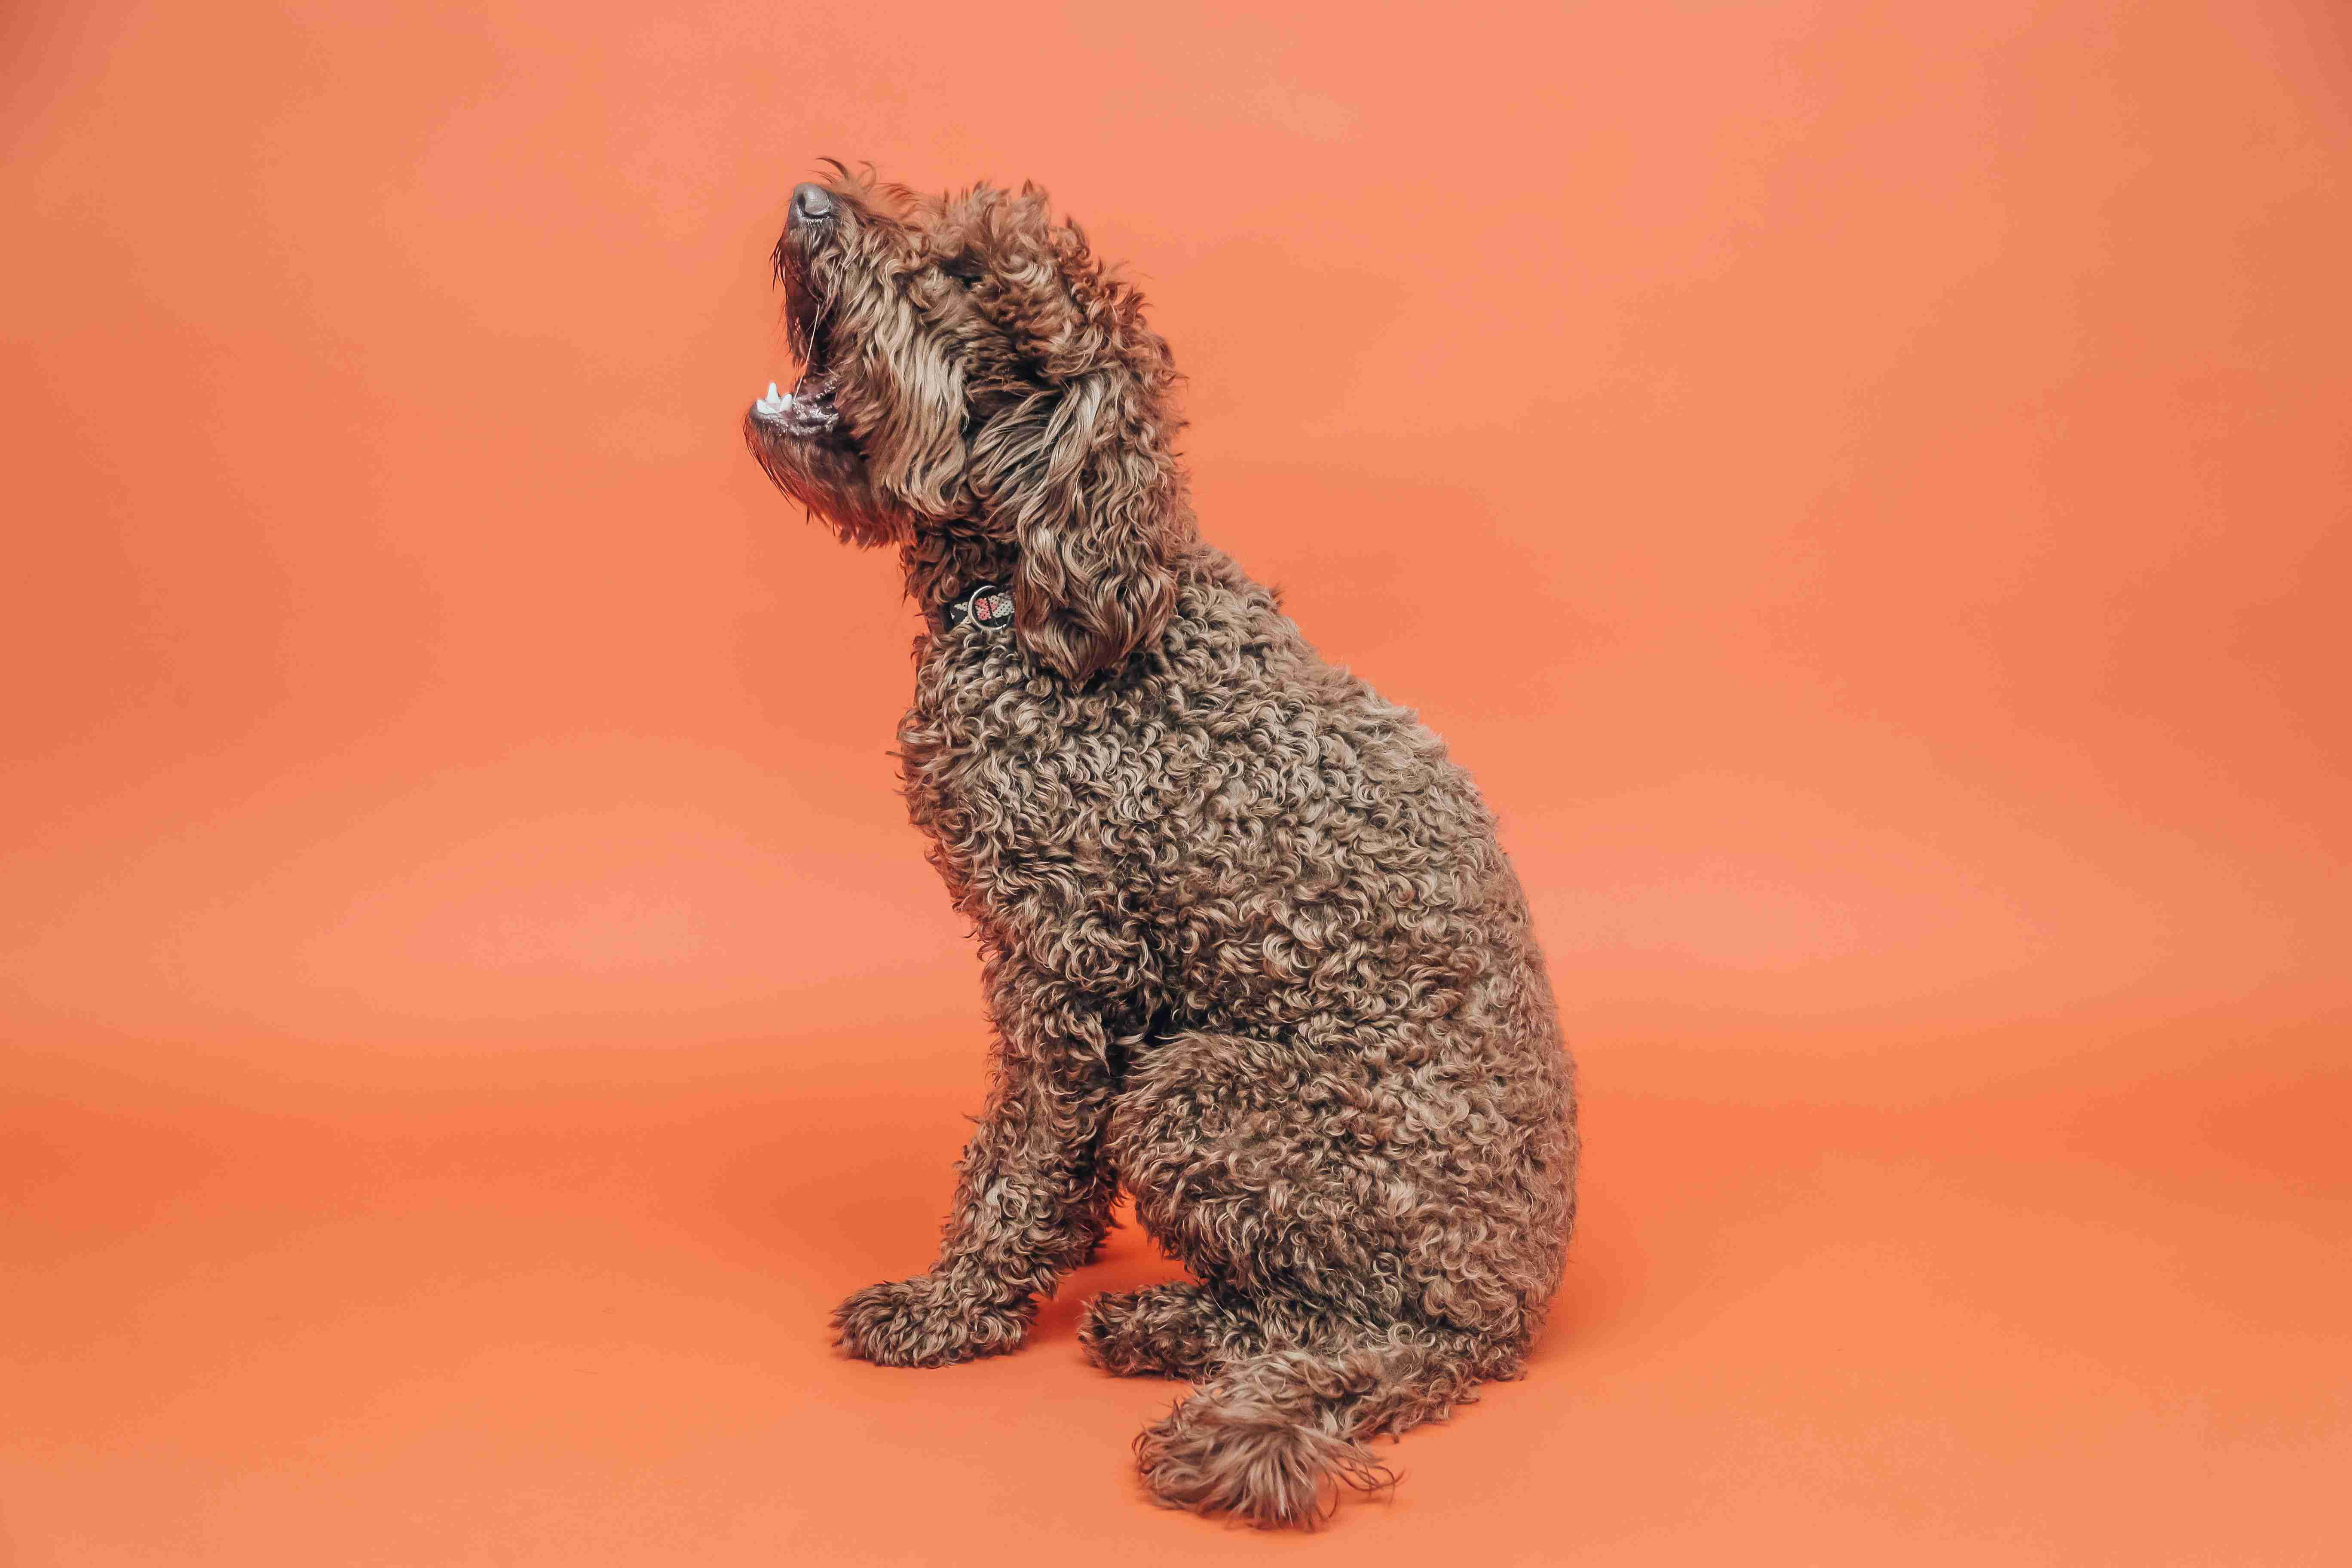 How can you start basic obedience training with your Poodle puppy during the first two weeks?